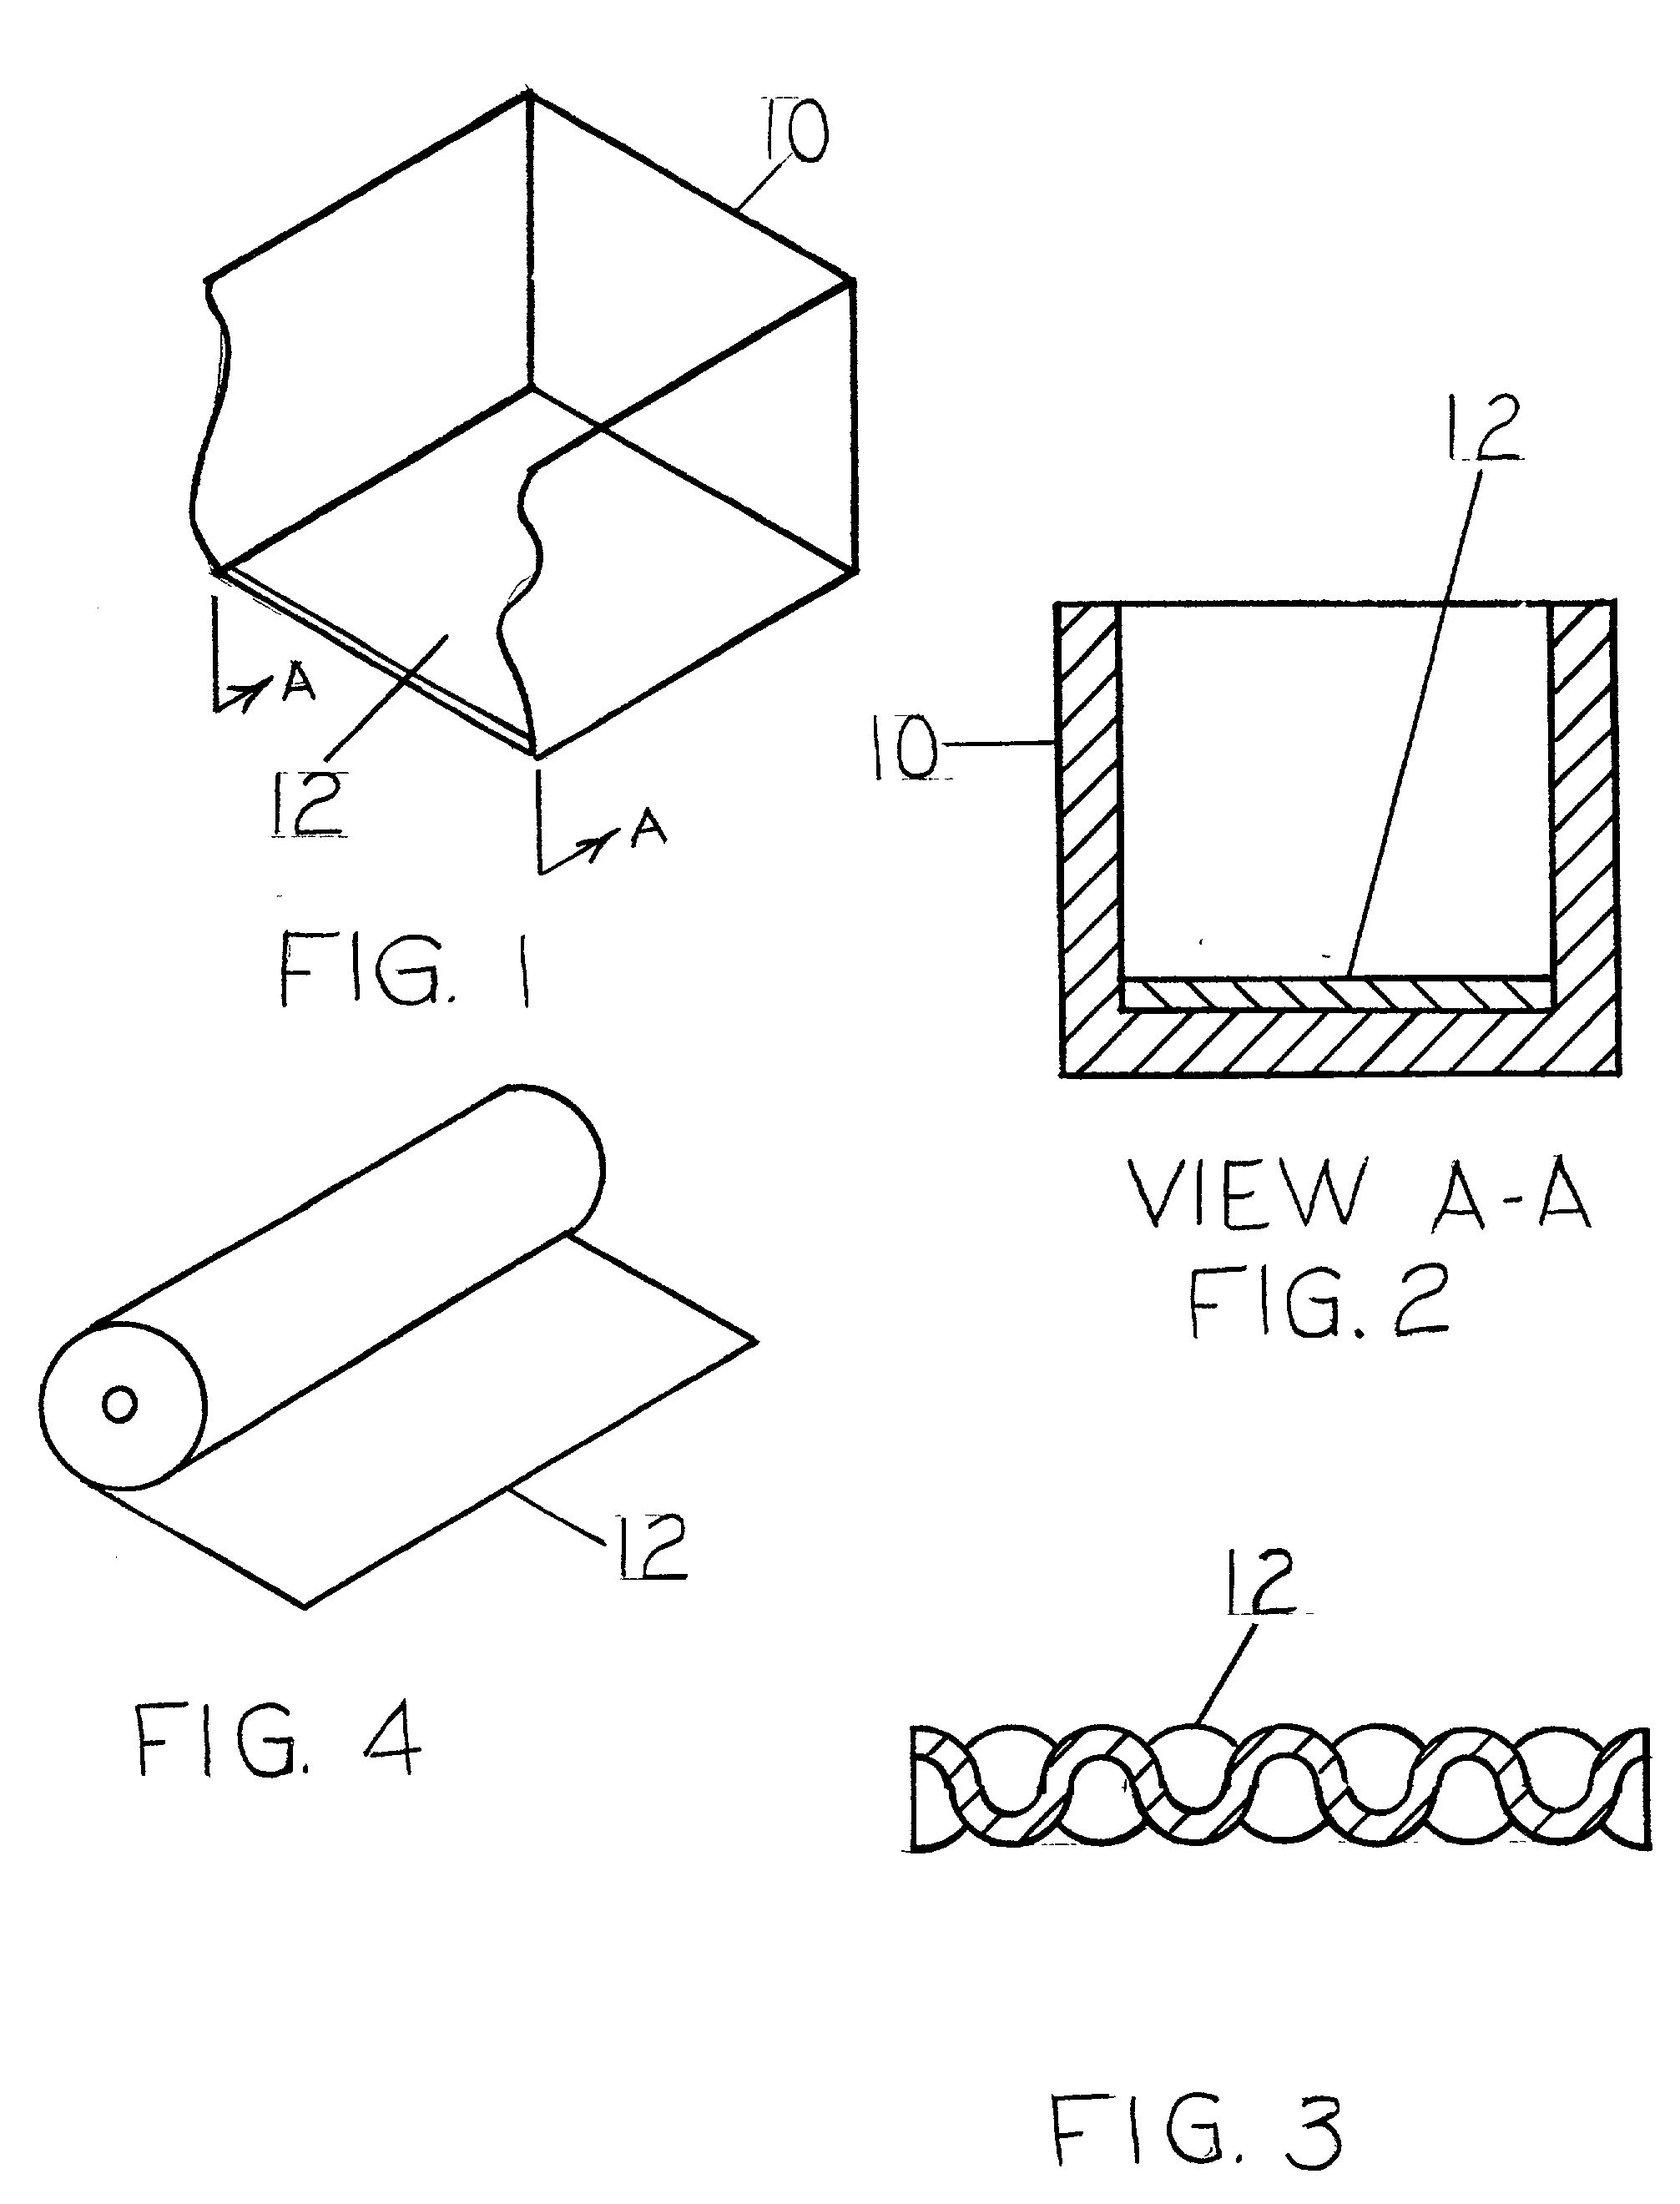 Method for producing odor and moisture absorbing pad for animals using protective containerboard